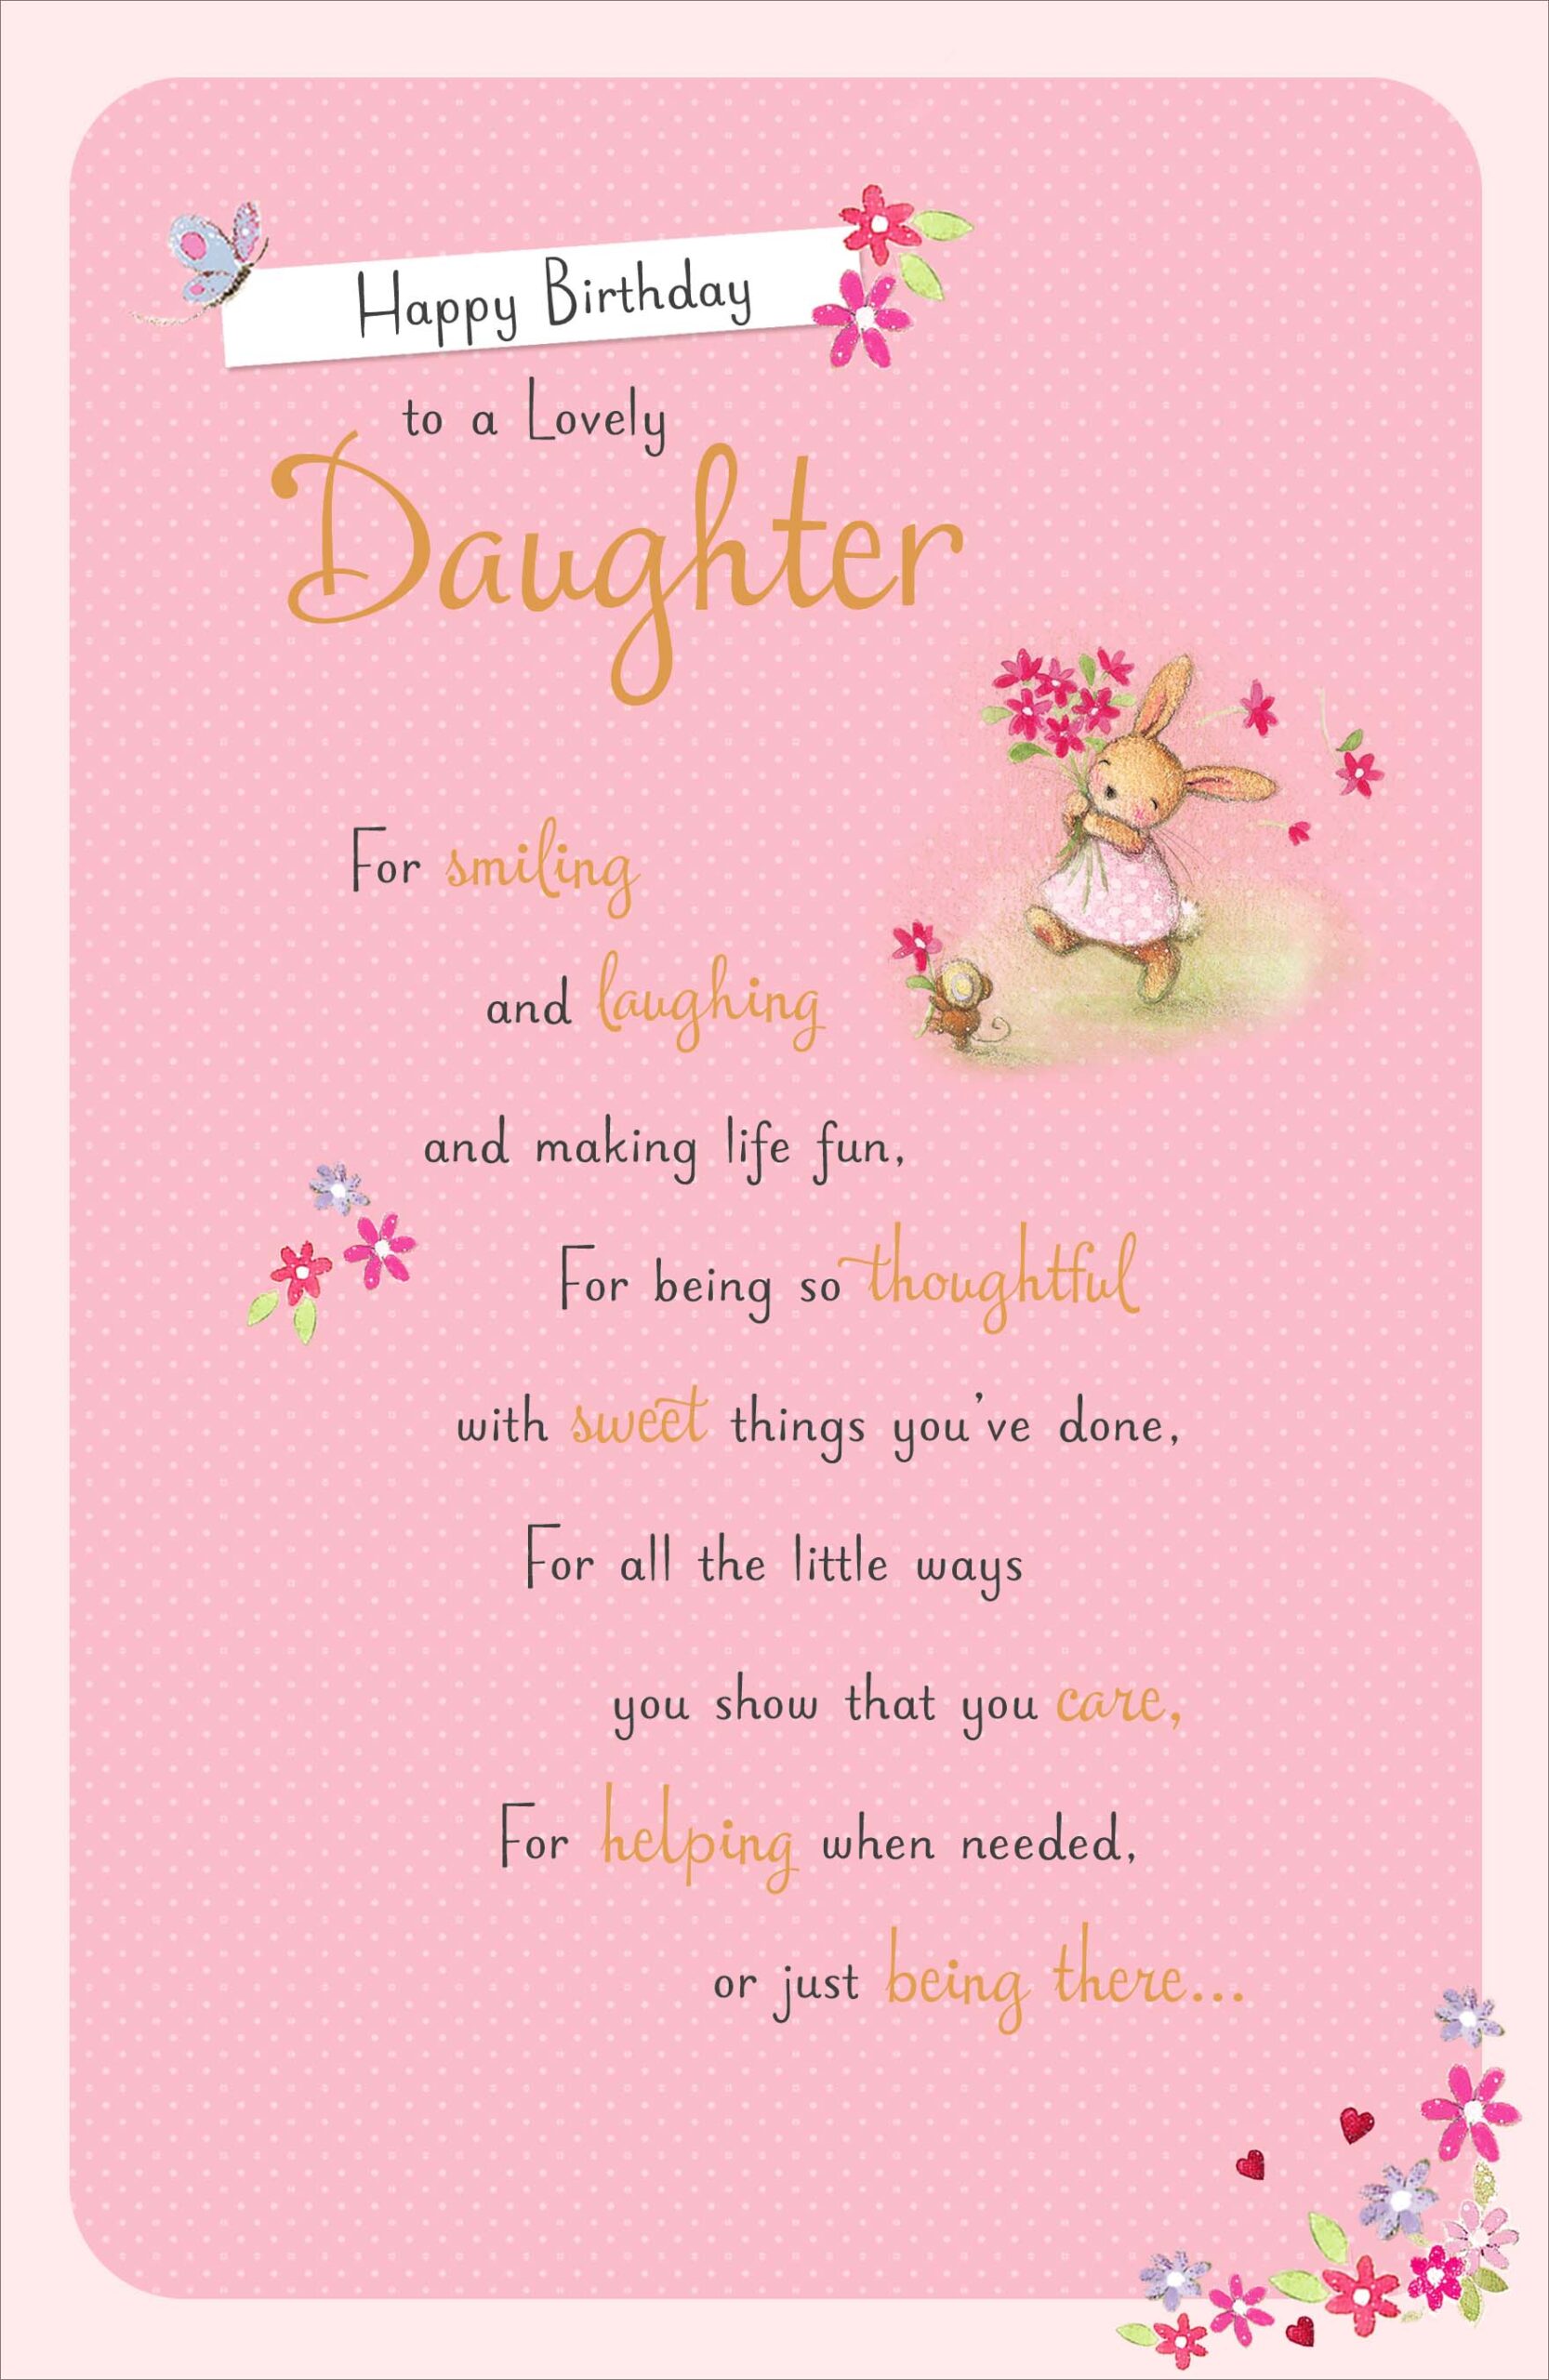 grown-up-daughter-birthday-poems-sites-unimi-it